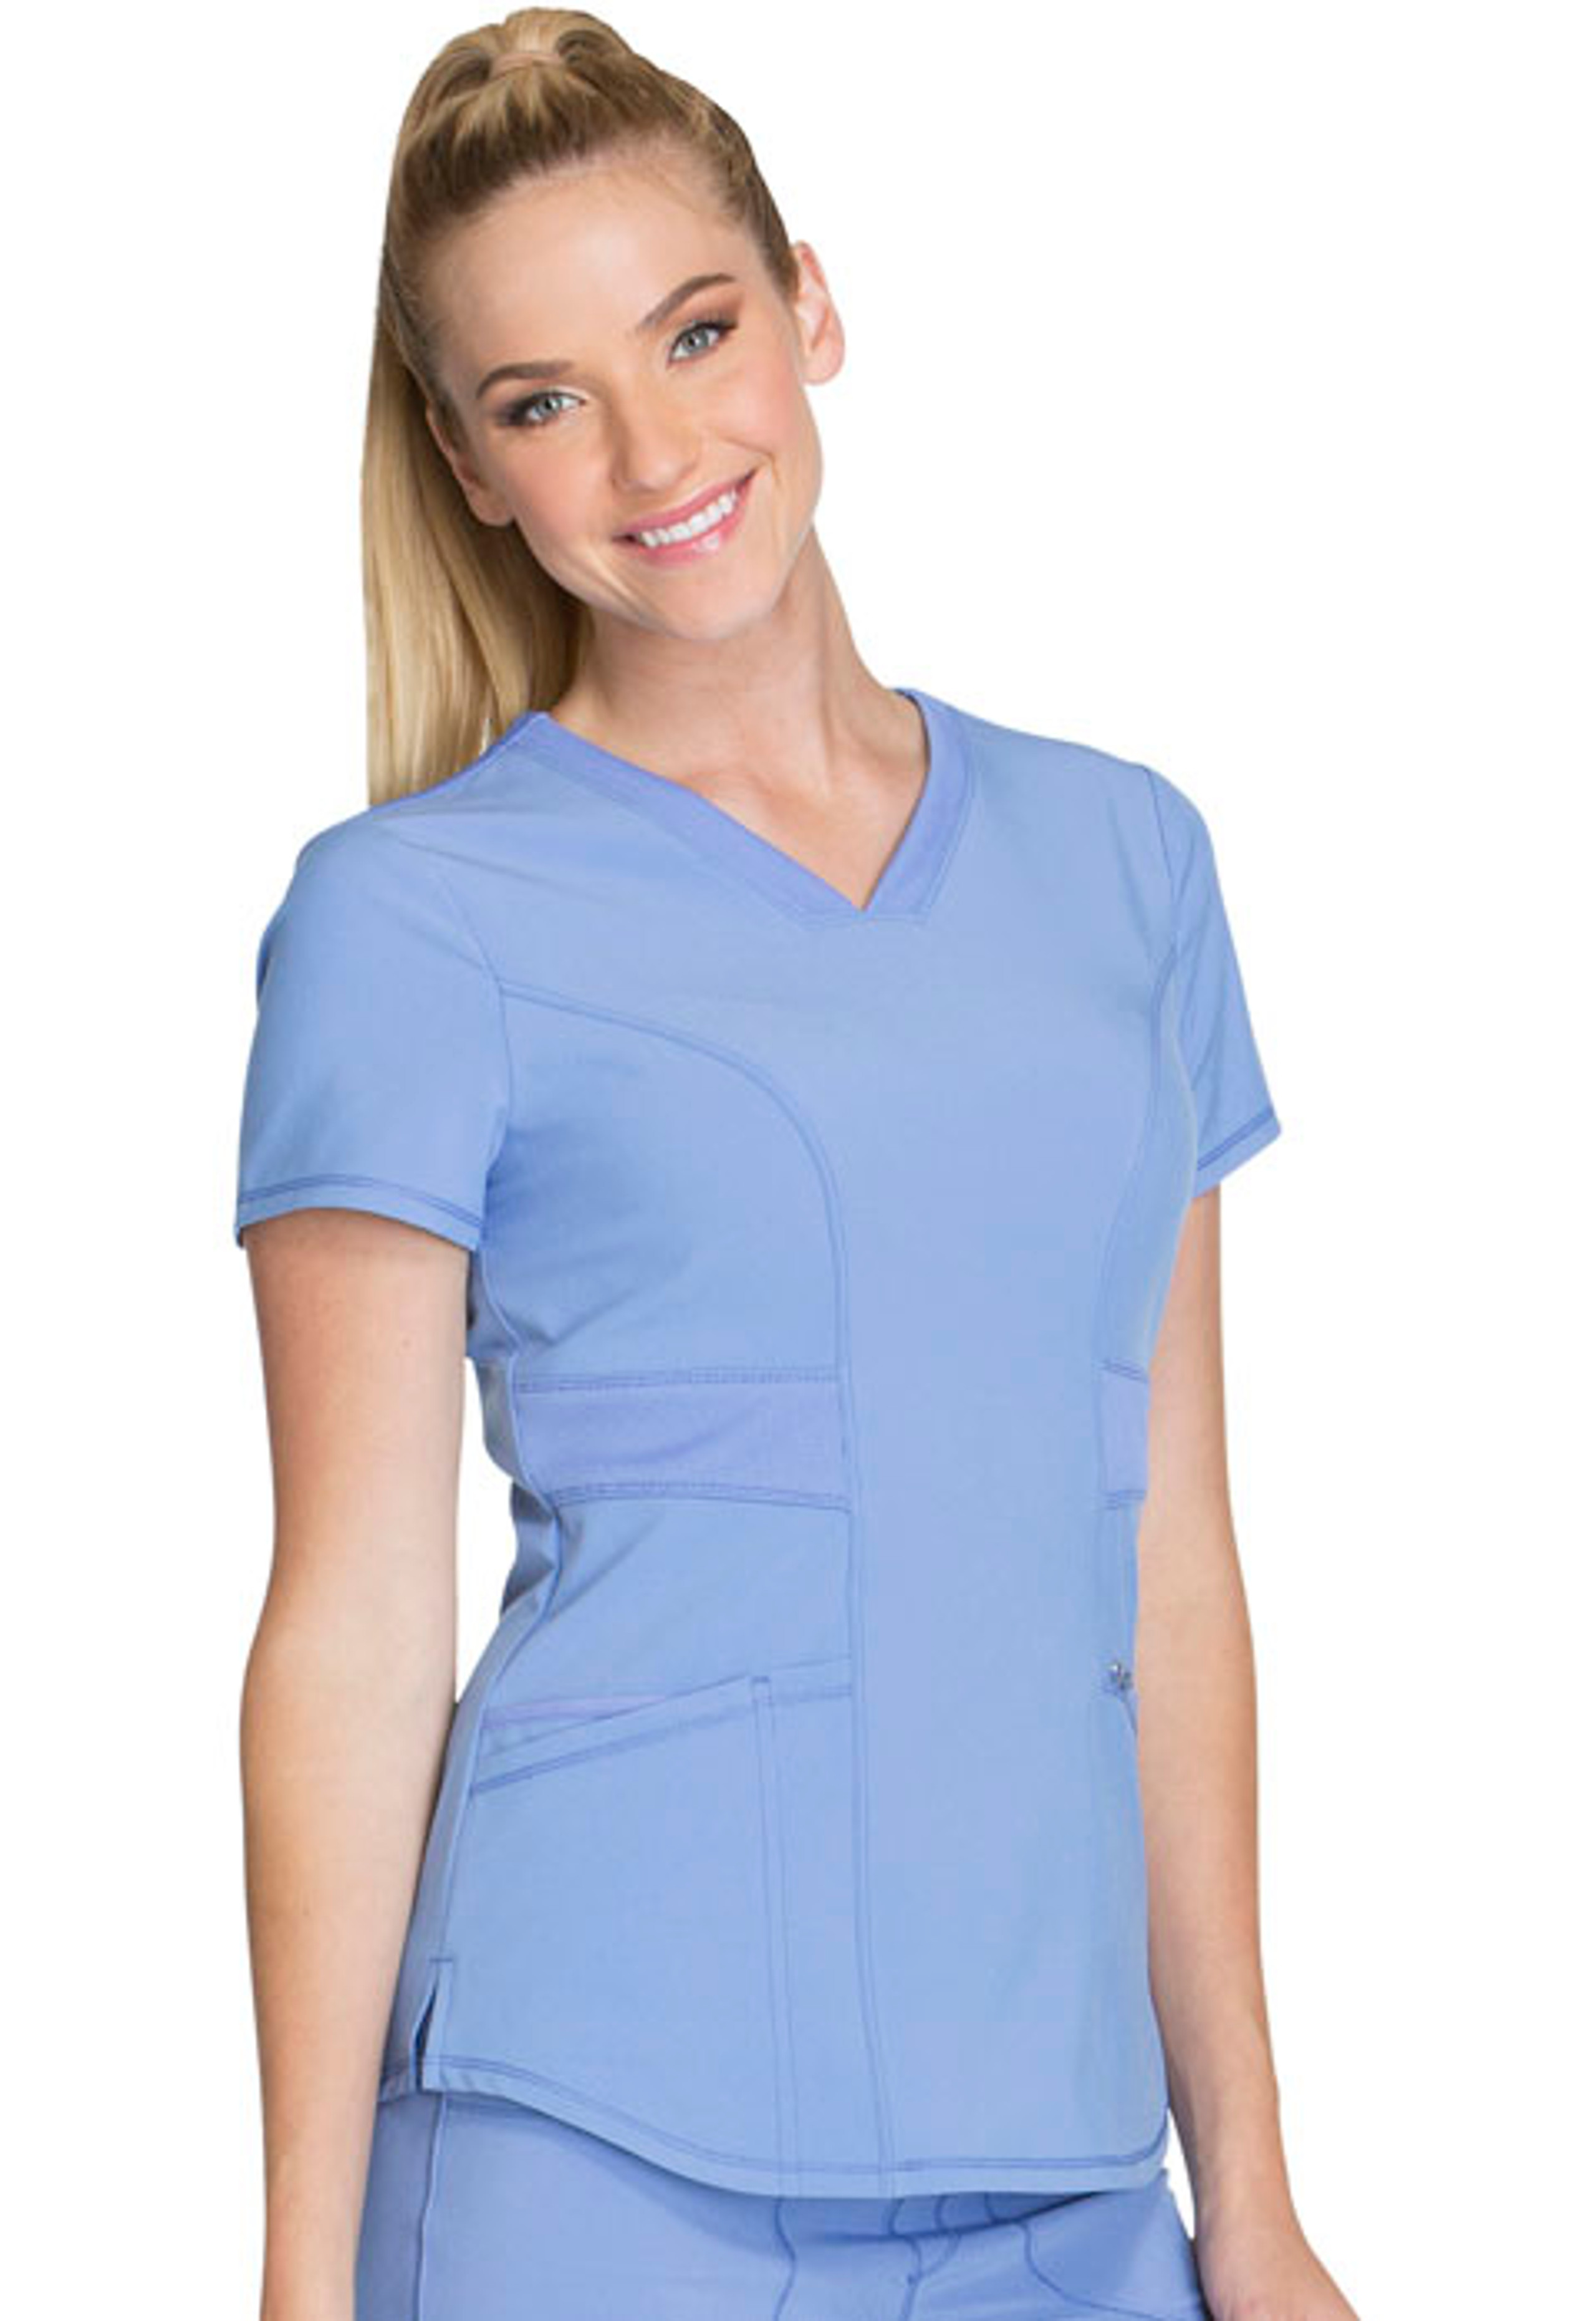 Infinity 2624 Round Neck Antimicrobial Scrub Top For Women